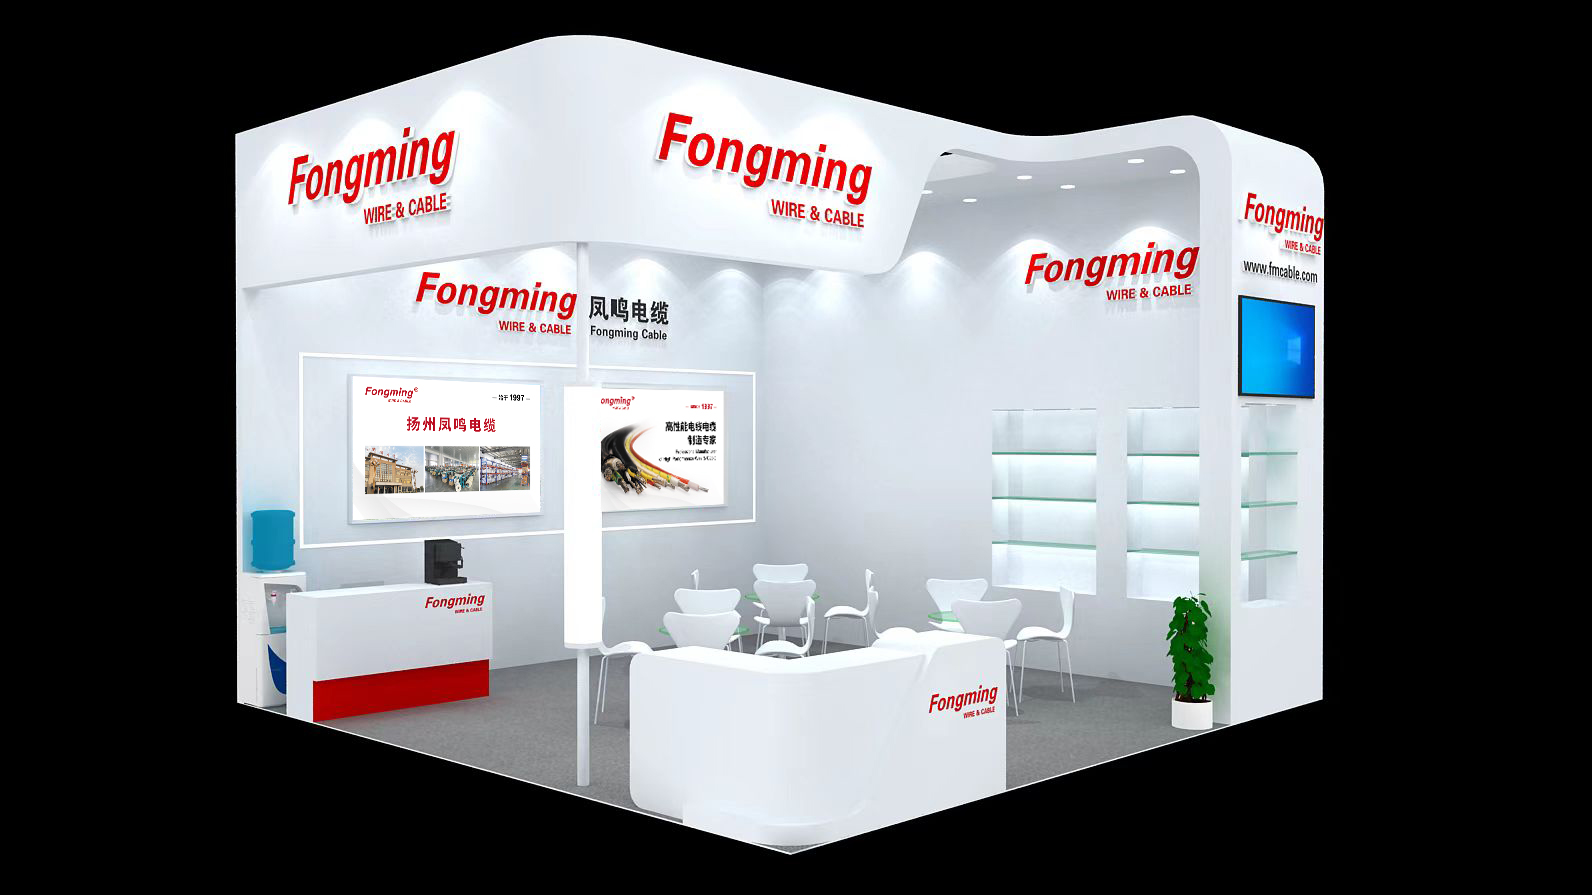 Fongming Cable 丨electronica China is about to start, Fongming Cable sincerely invites you to visit